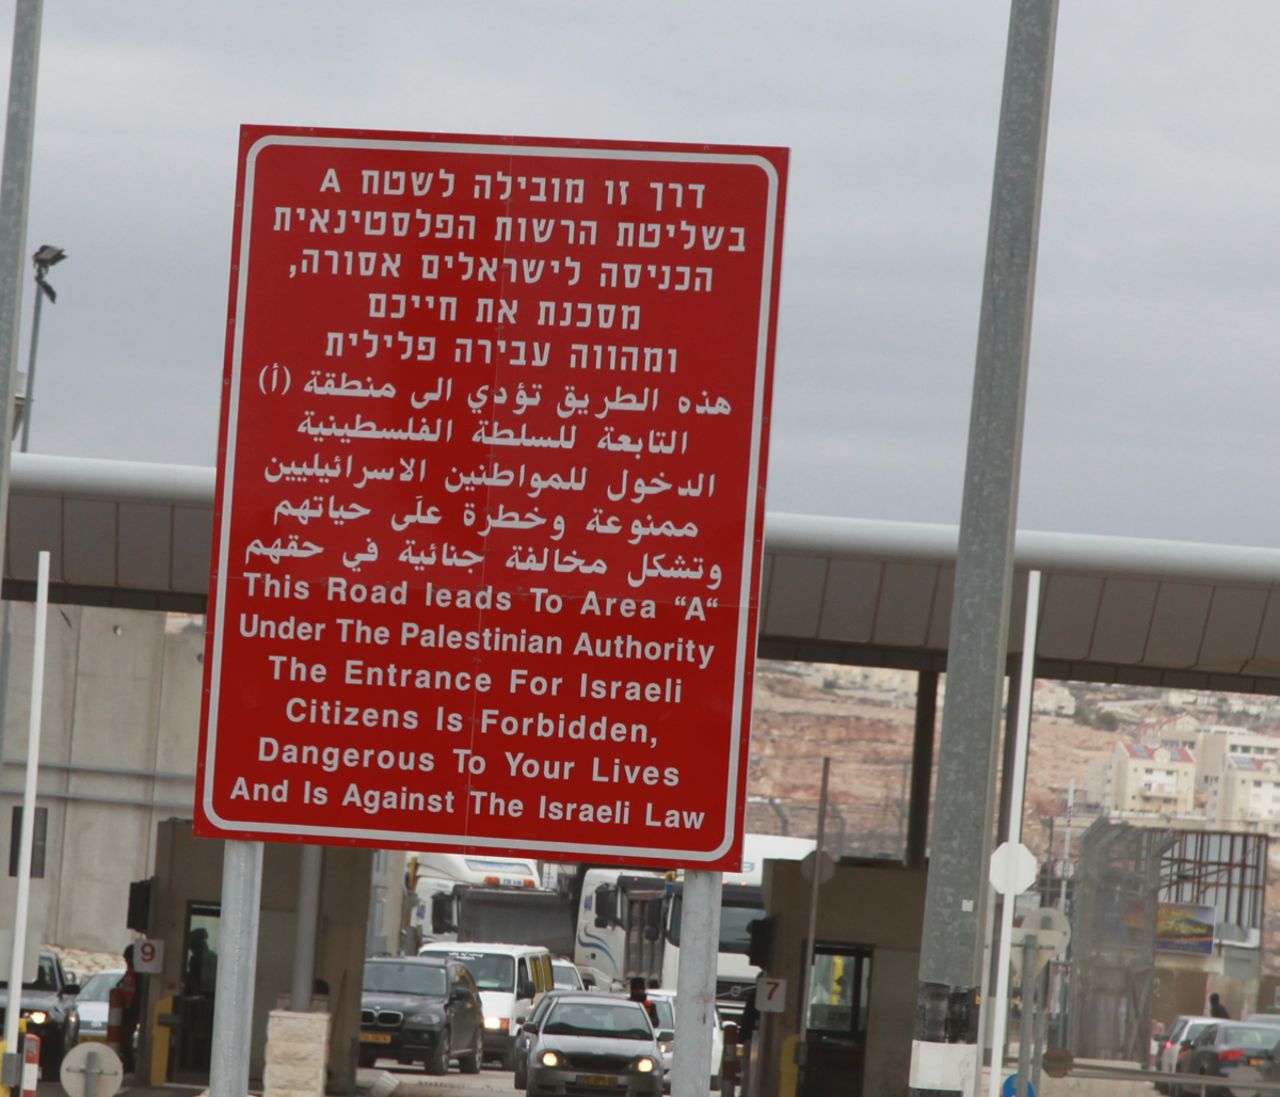 The sign at the checkpoint to the West Bank warns Israelis that it is illegal for them to enter Bethlehem -- as well as dangerous to their lives.